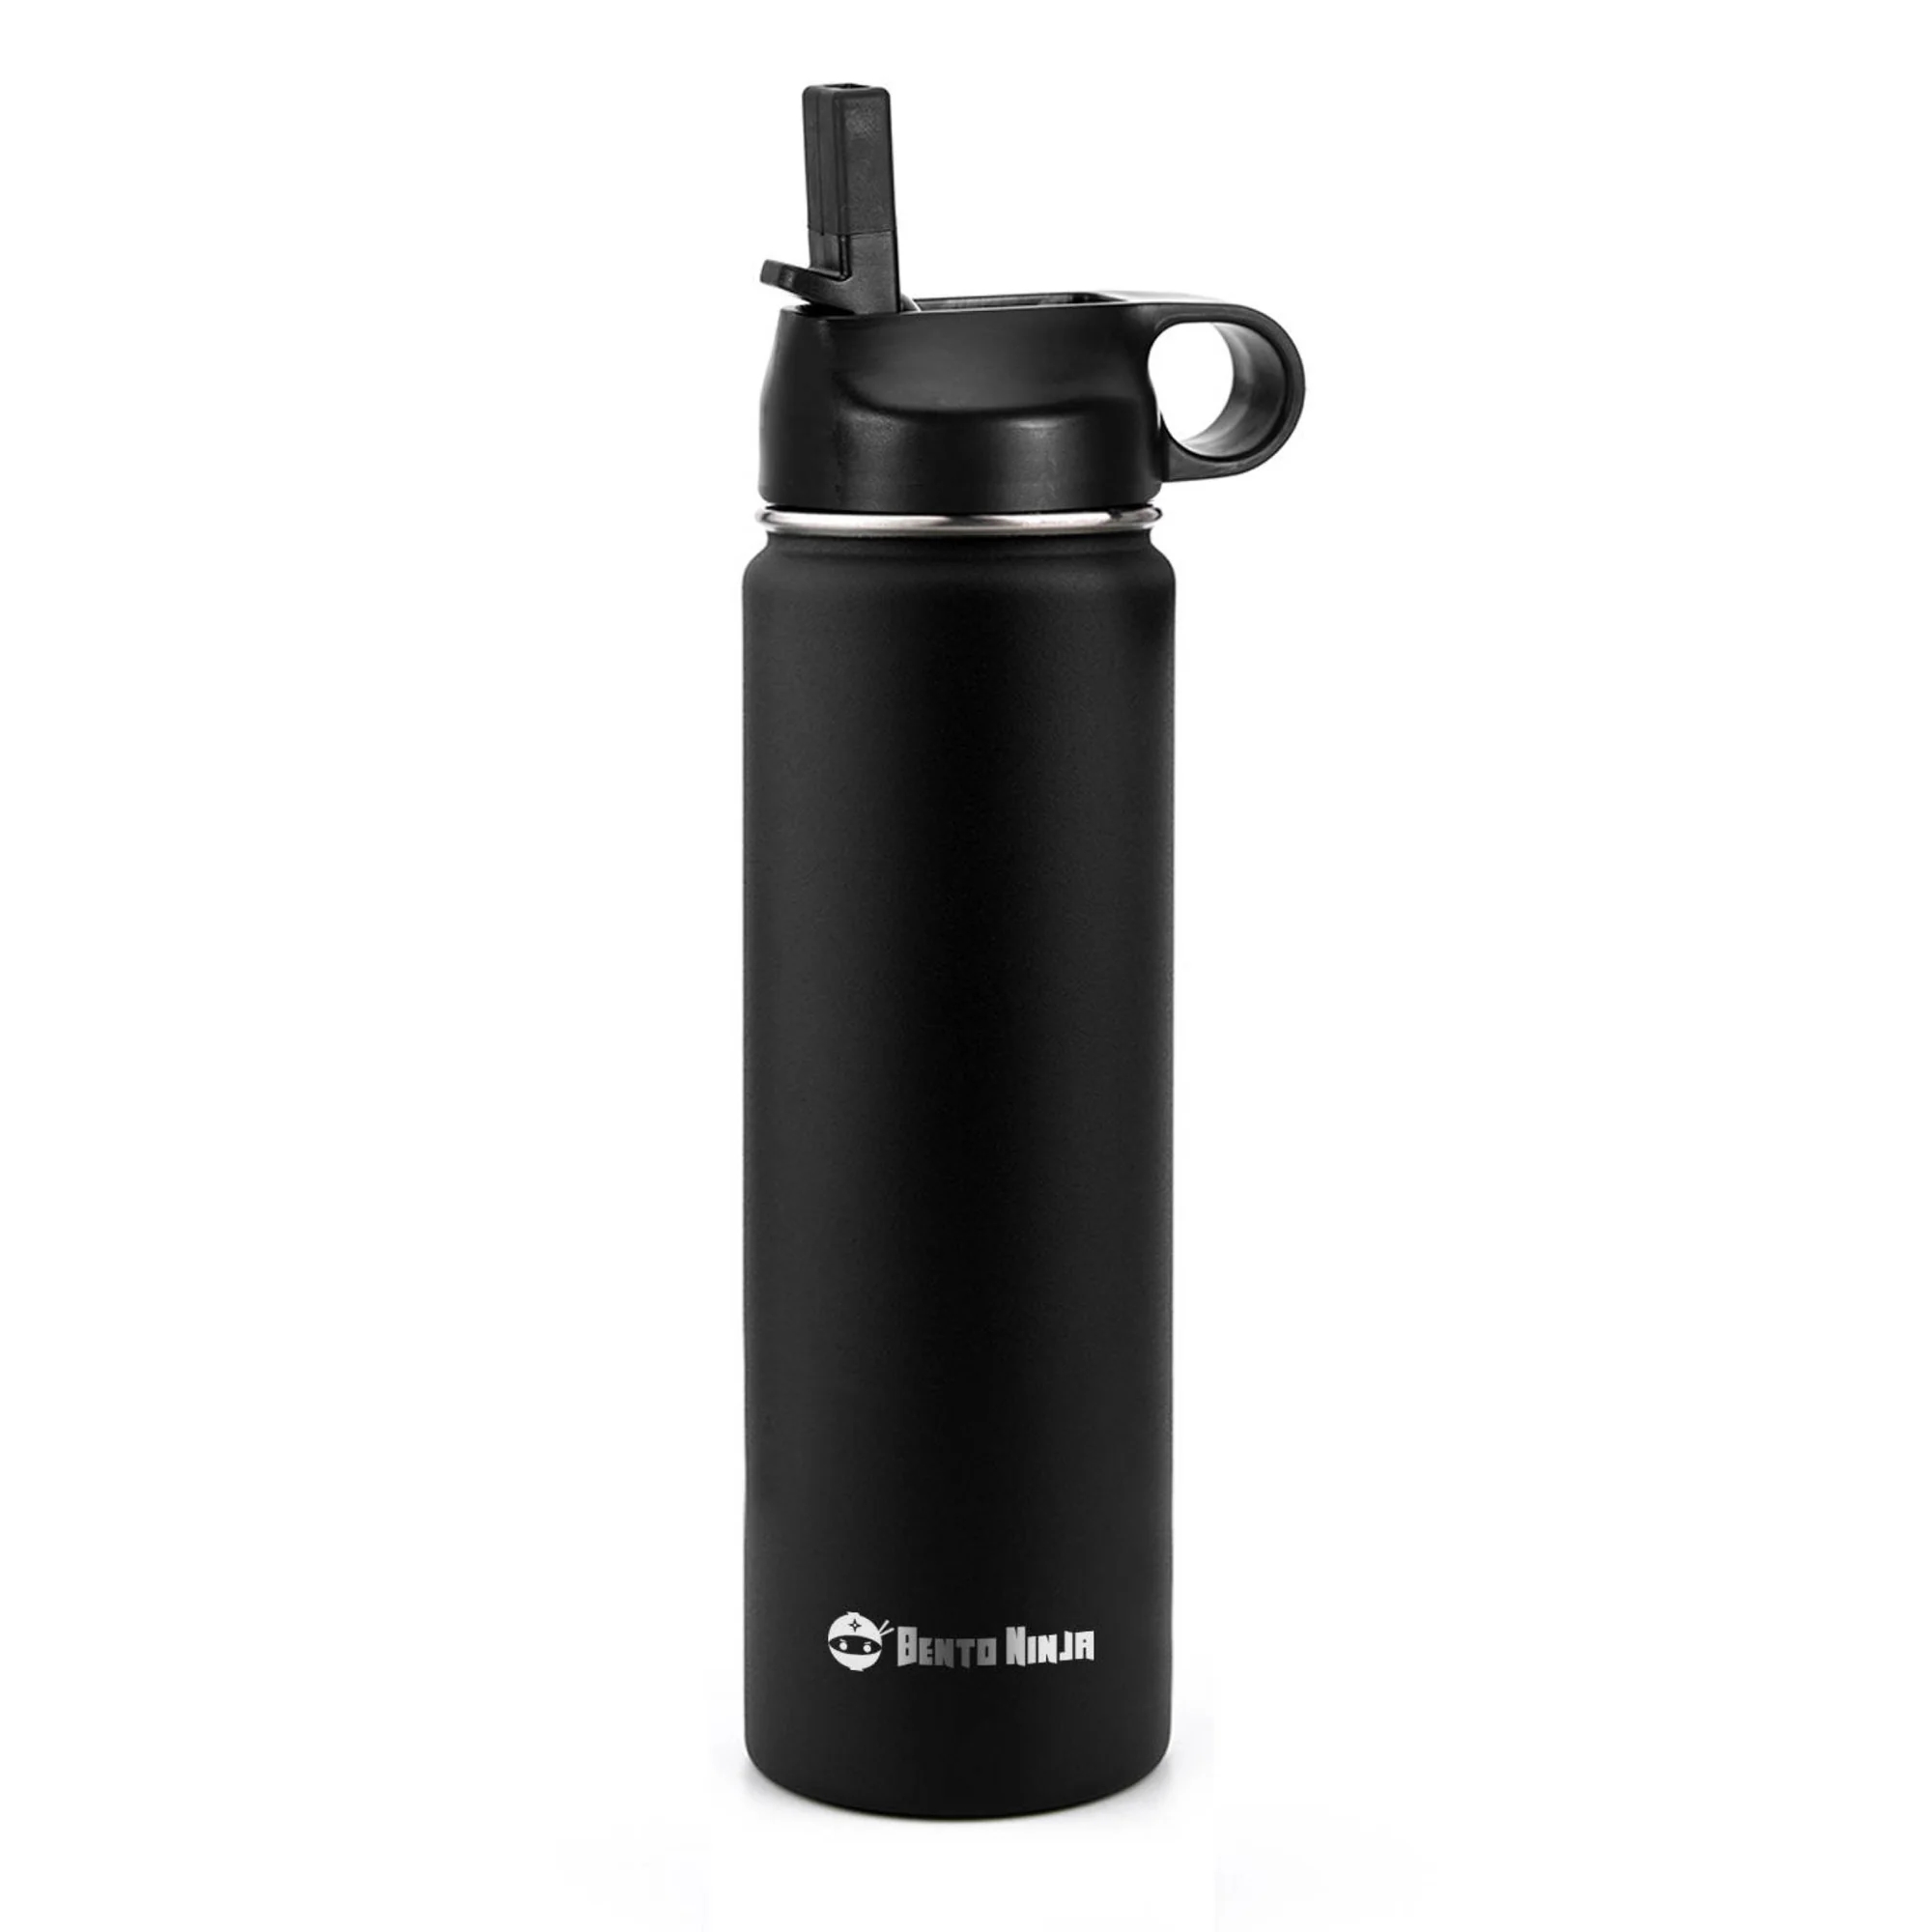 Watersy Triple-Insulated Stainless Steel Water Bottle 17 Ounce /500ml,  Powder Coat Insulated Water Bottles, Keeps Hot and Cold, 100% Leakproof  Lids